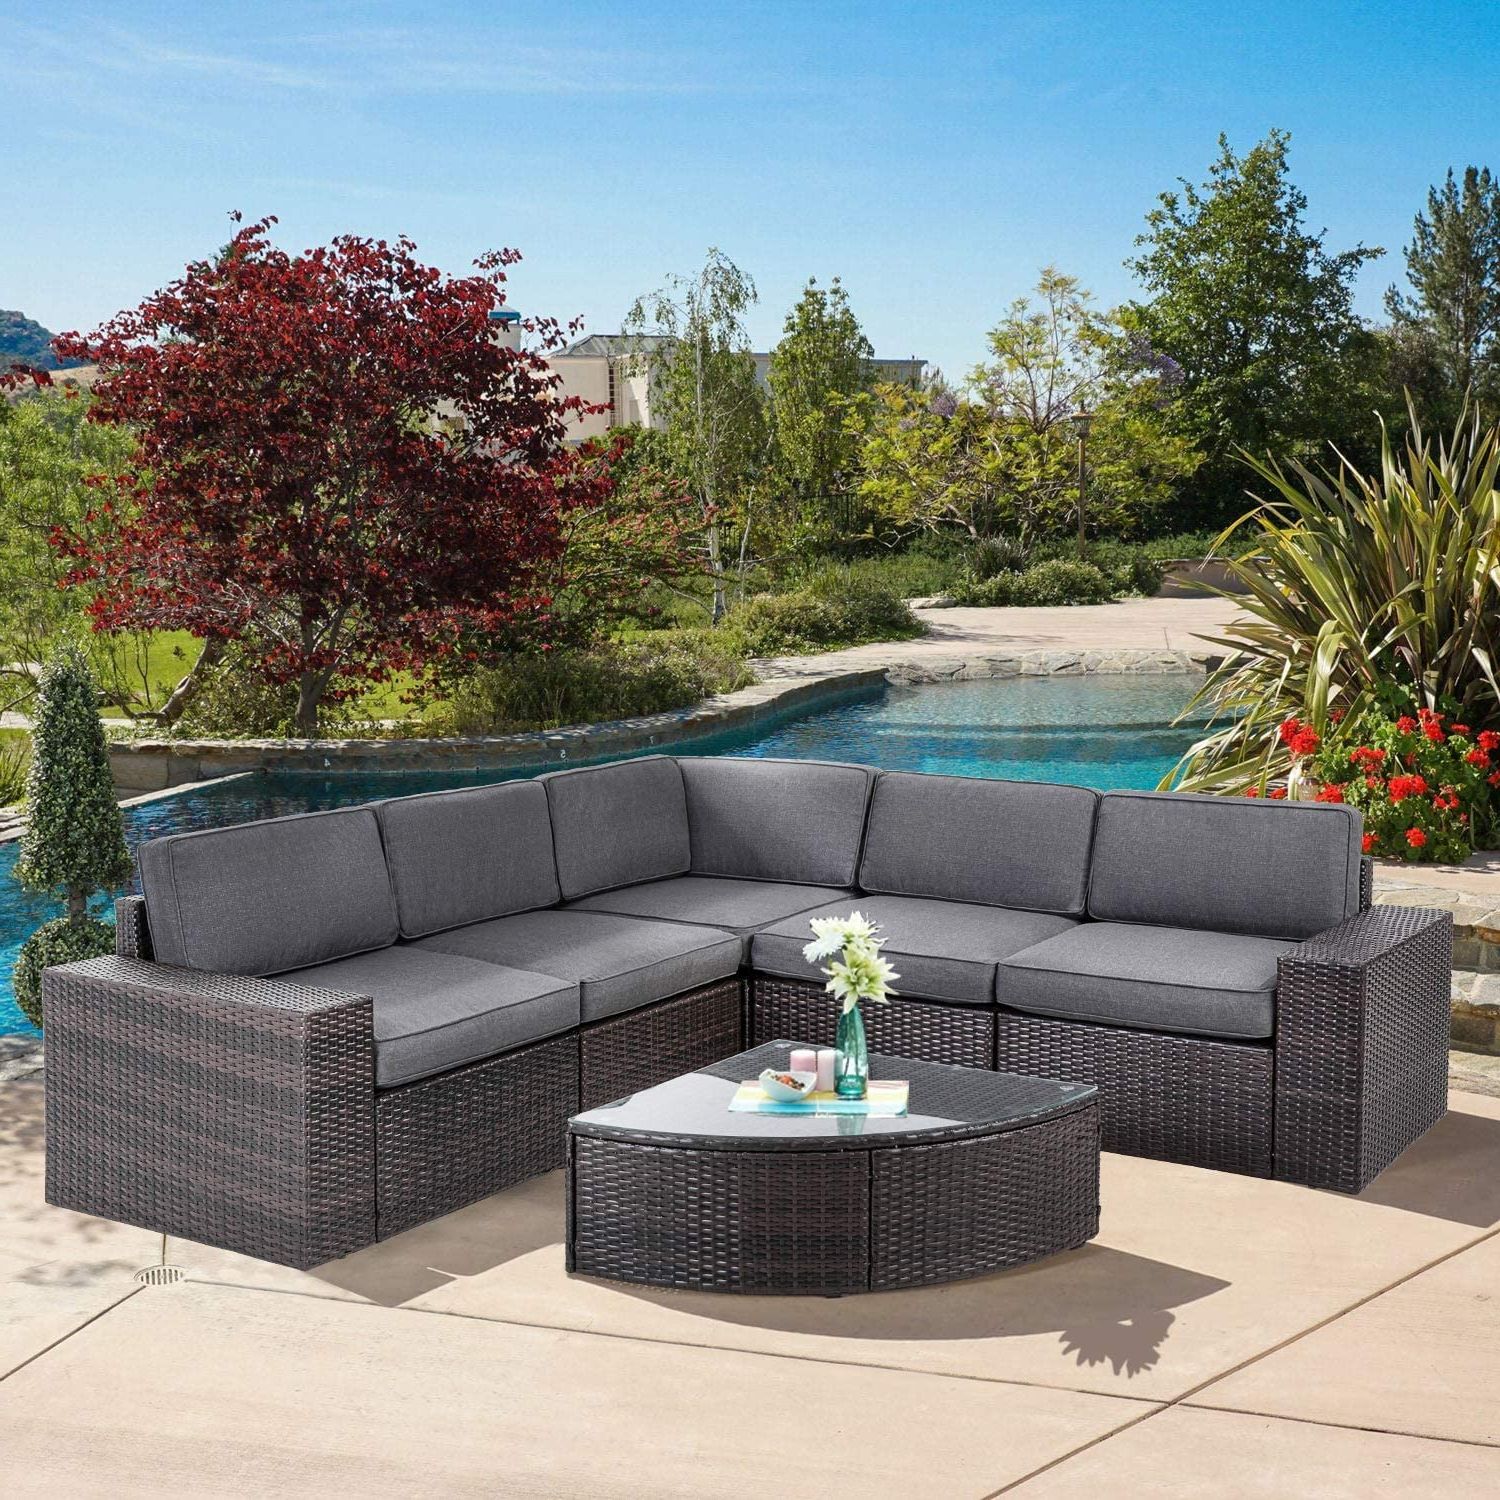 Suncrown Outdoor Furniture 6 Piece Patio Sofa And Wedge Table Set, All With Well Known Gray Outdoor Table And Loveseat Sets (View 5 of 15)